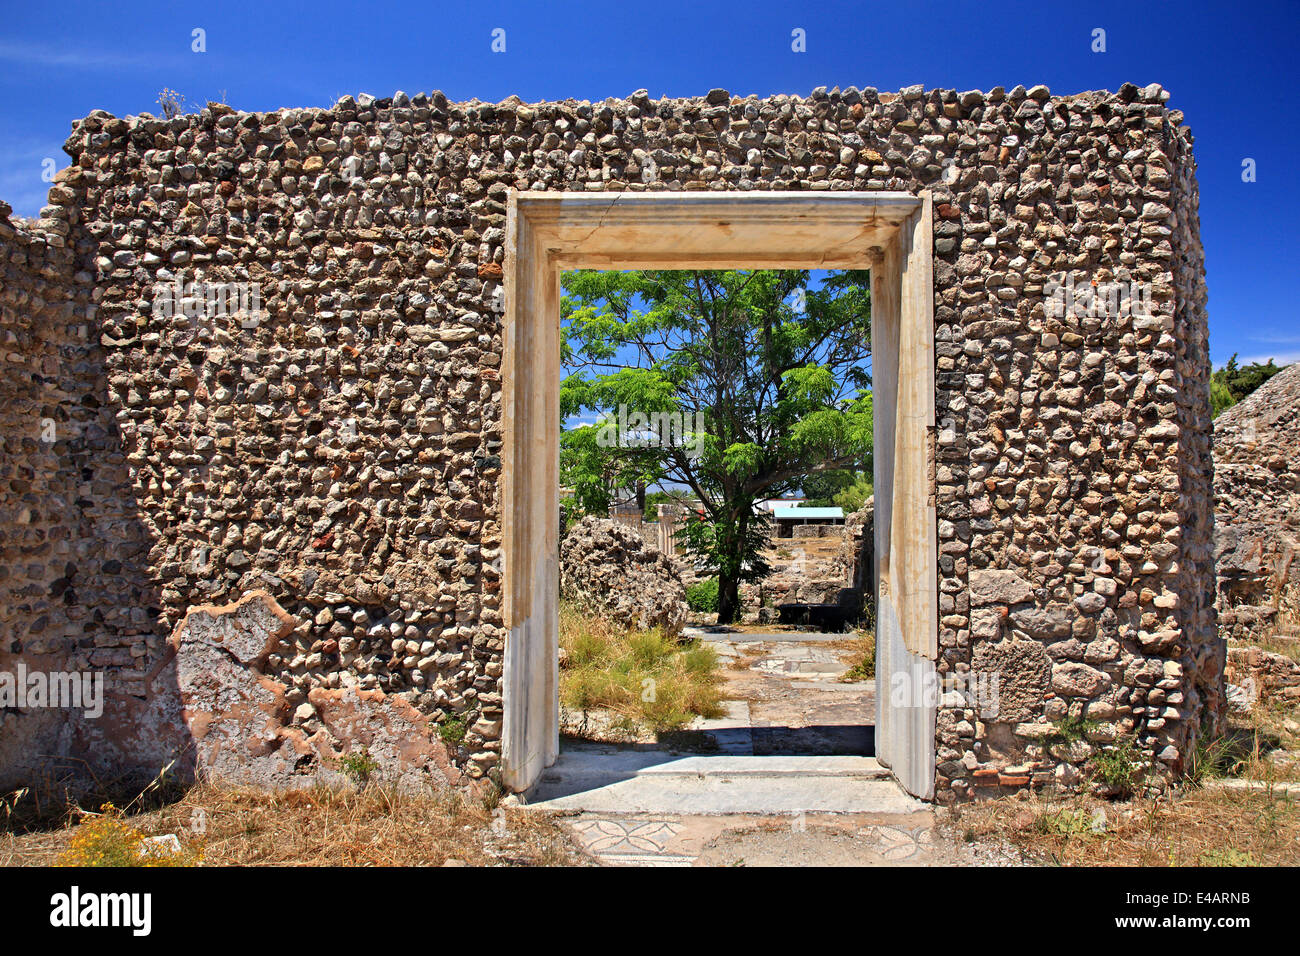 At the Western Archaeological site (Western Thermae), Kos town, Kos island, Aegean sea, Dodecanese, Greece. Stock Photo